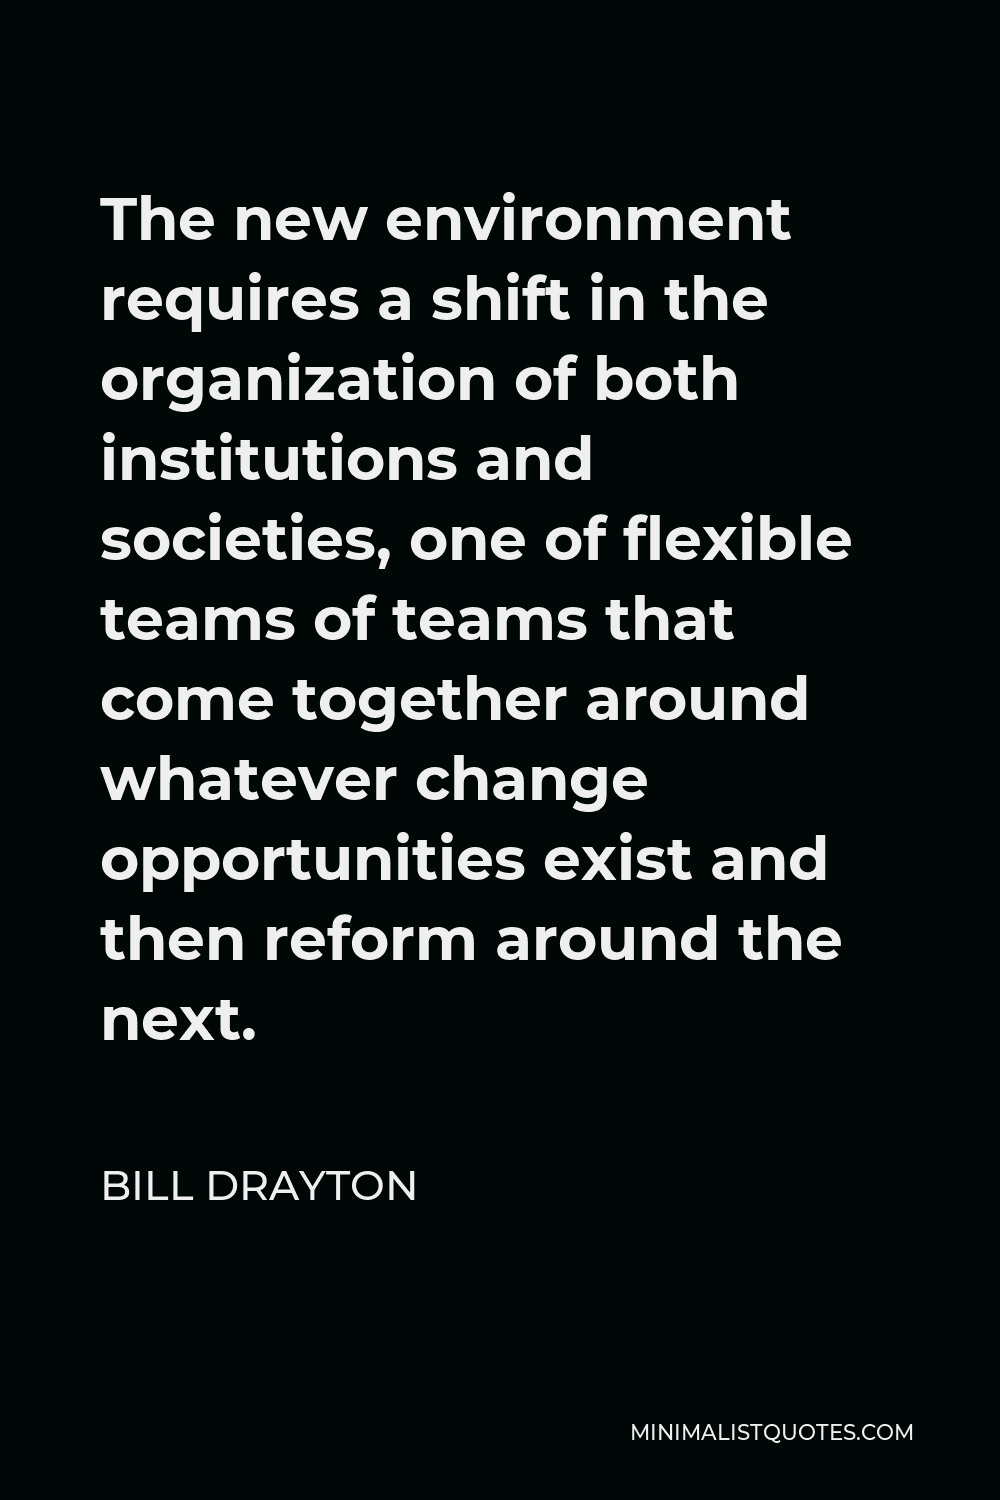 Bill Drayton Quote - The new environment requires a shift in the organization of both institutions and societies, one of flexible teams of teams that come together around whatever change opportunities exist and then reform around the next.